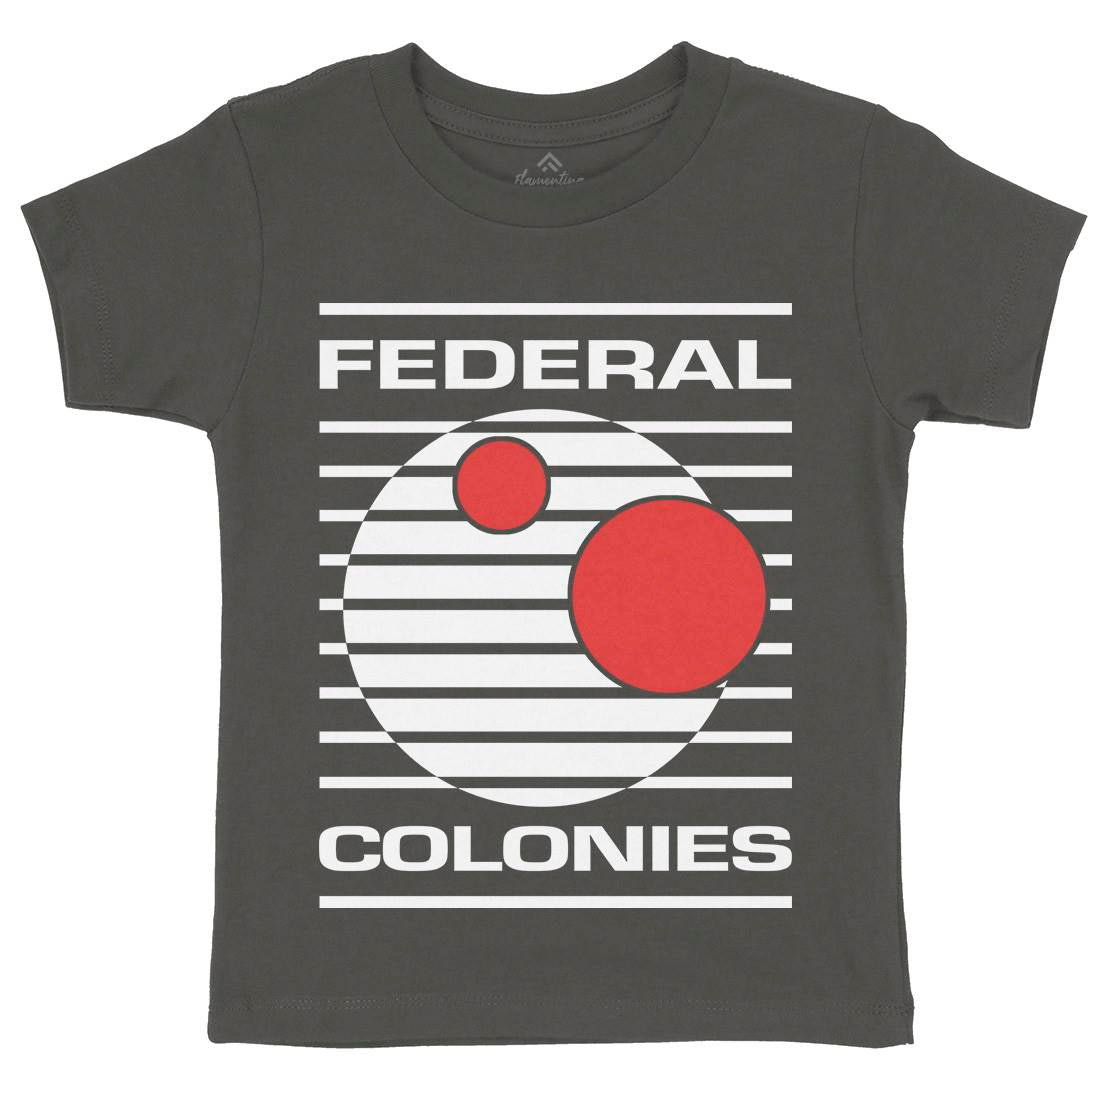 Federal Colonies Kids Crew Neck T-Shirt Space D409